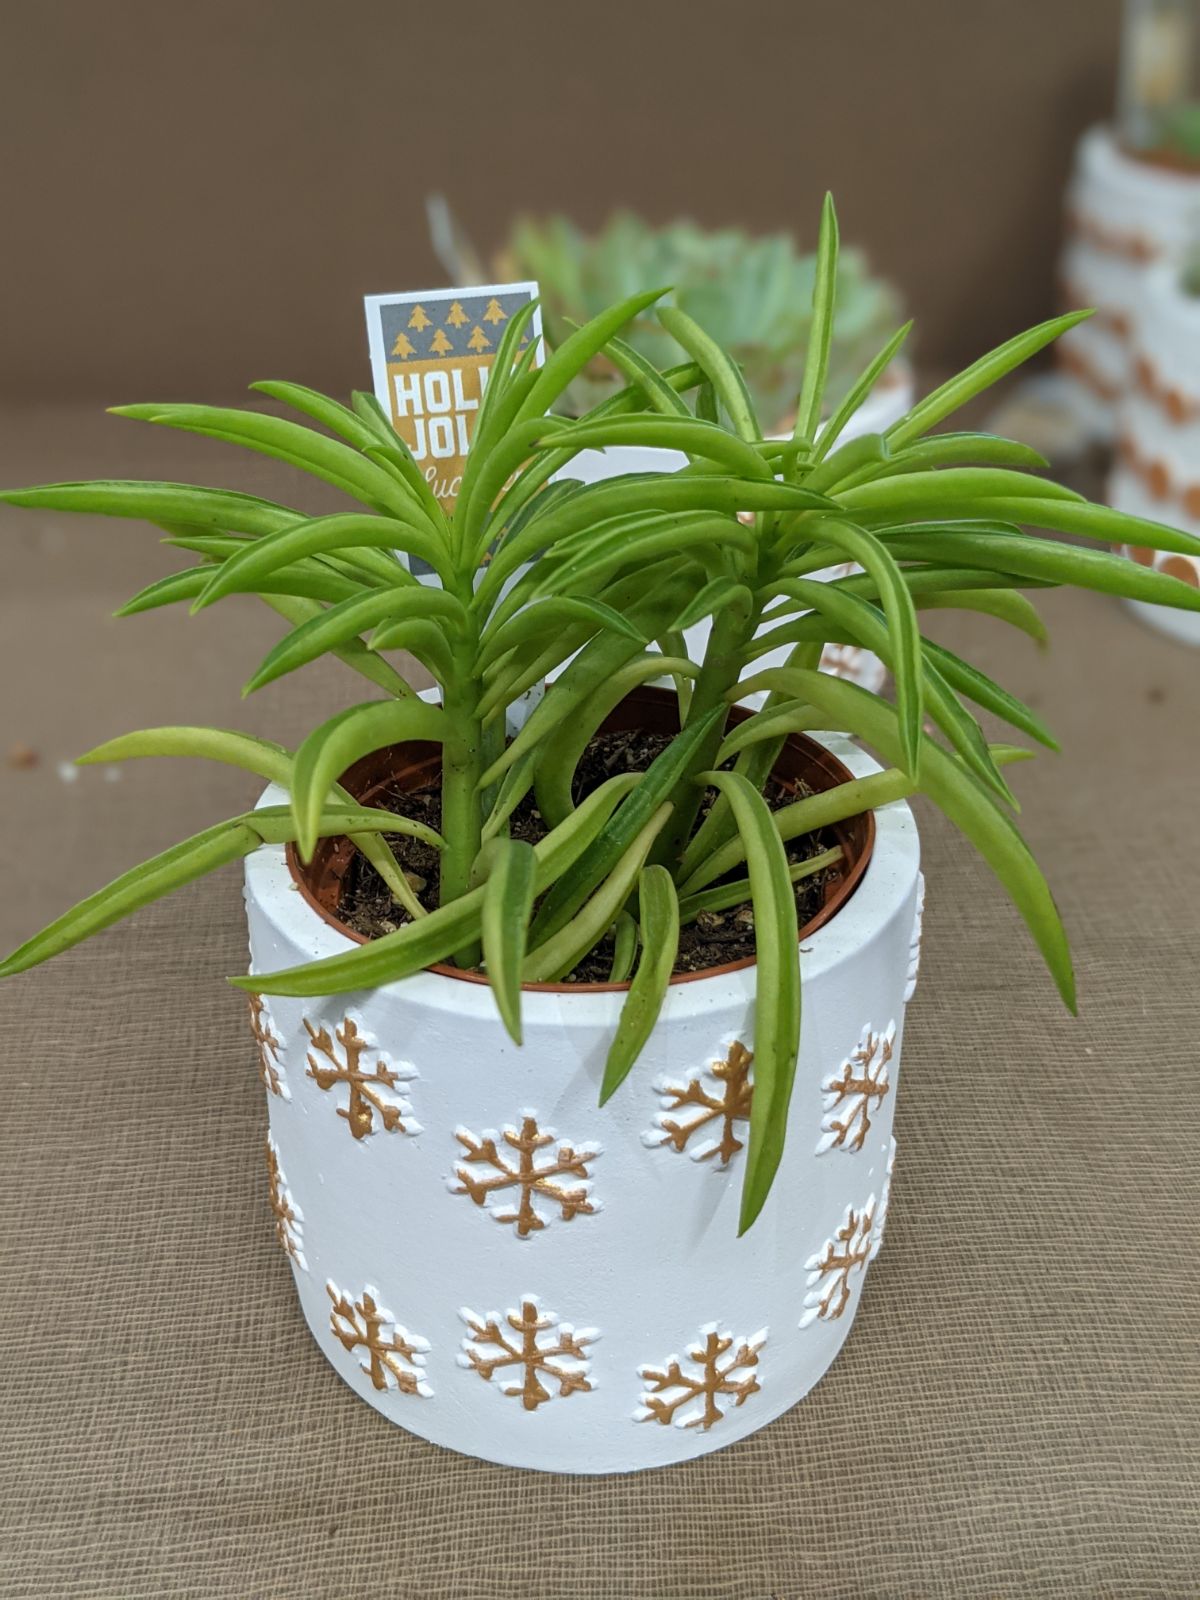 Snowflake pot succulent looks like a palm tree, purchased at Aldi in December 2021